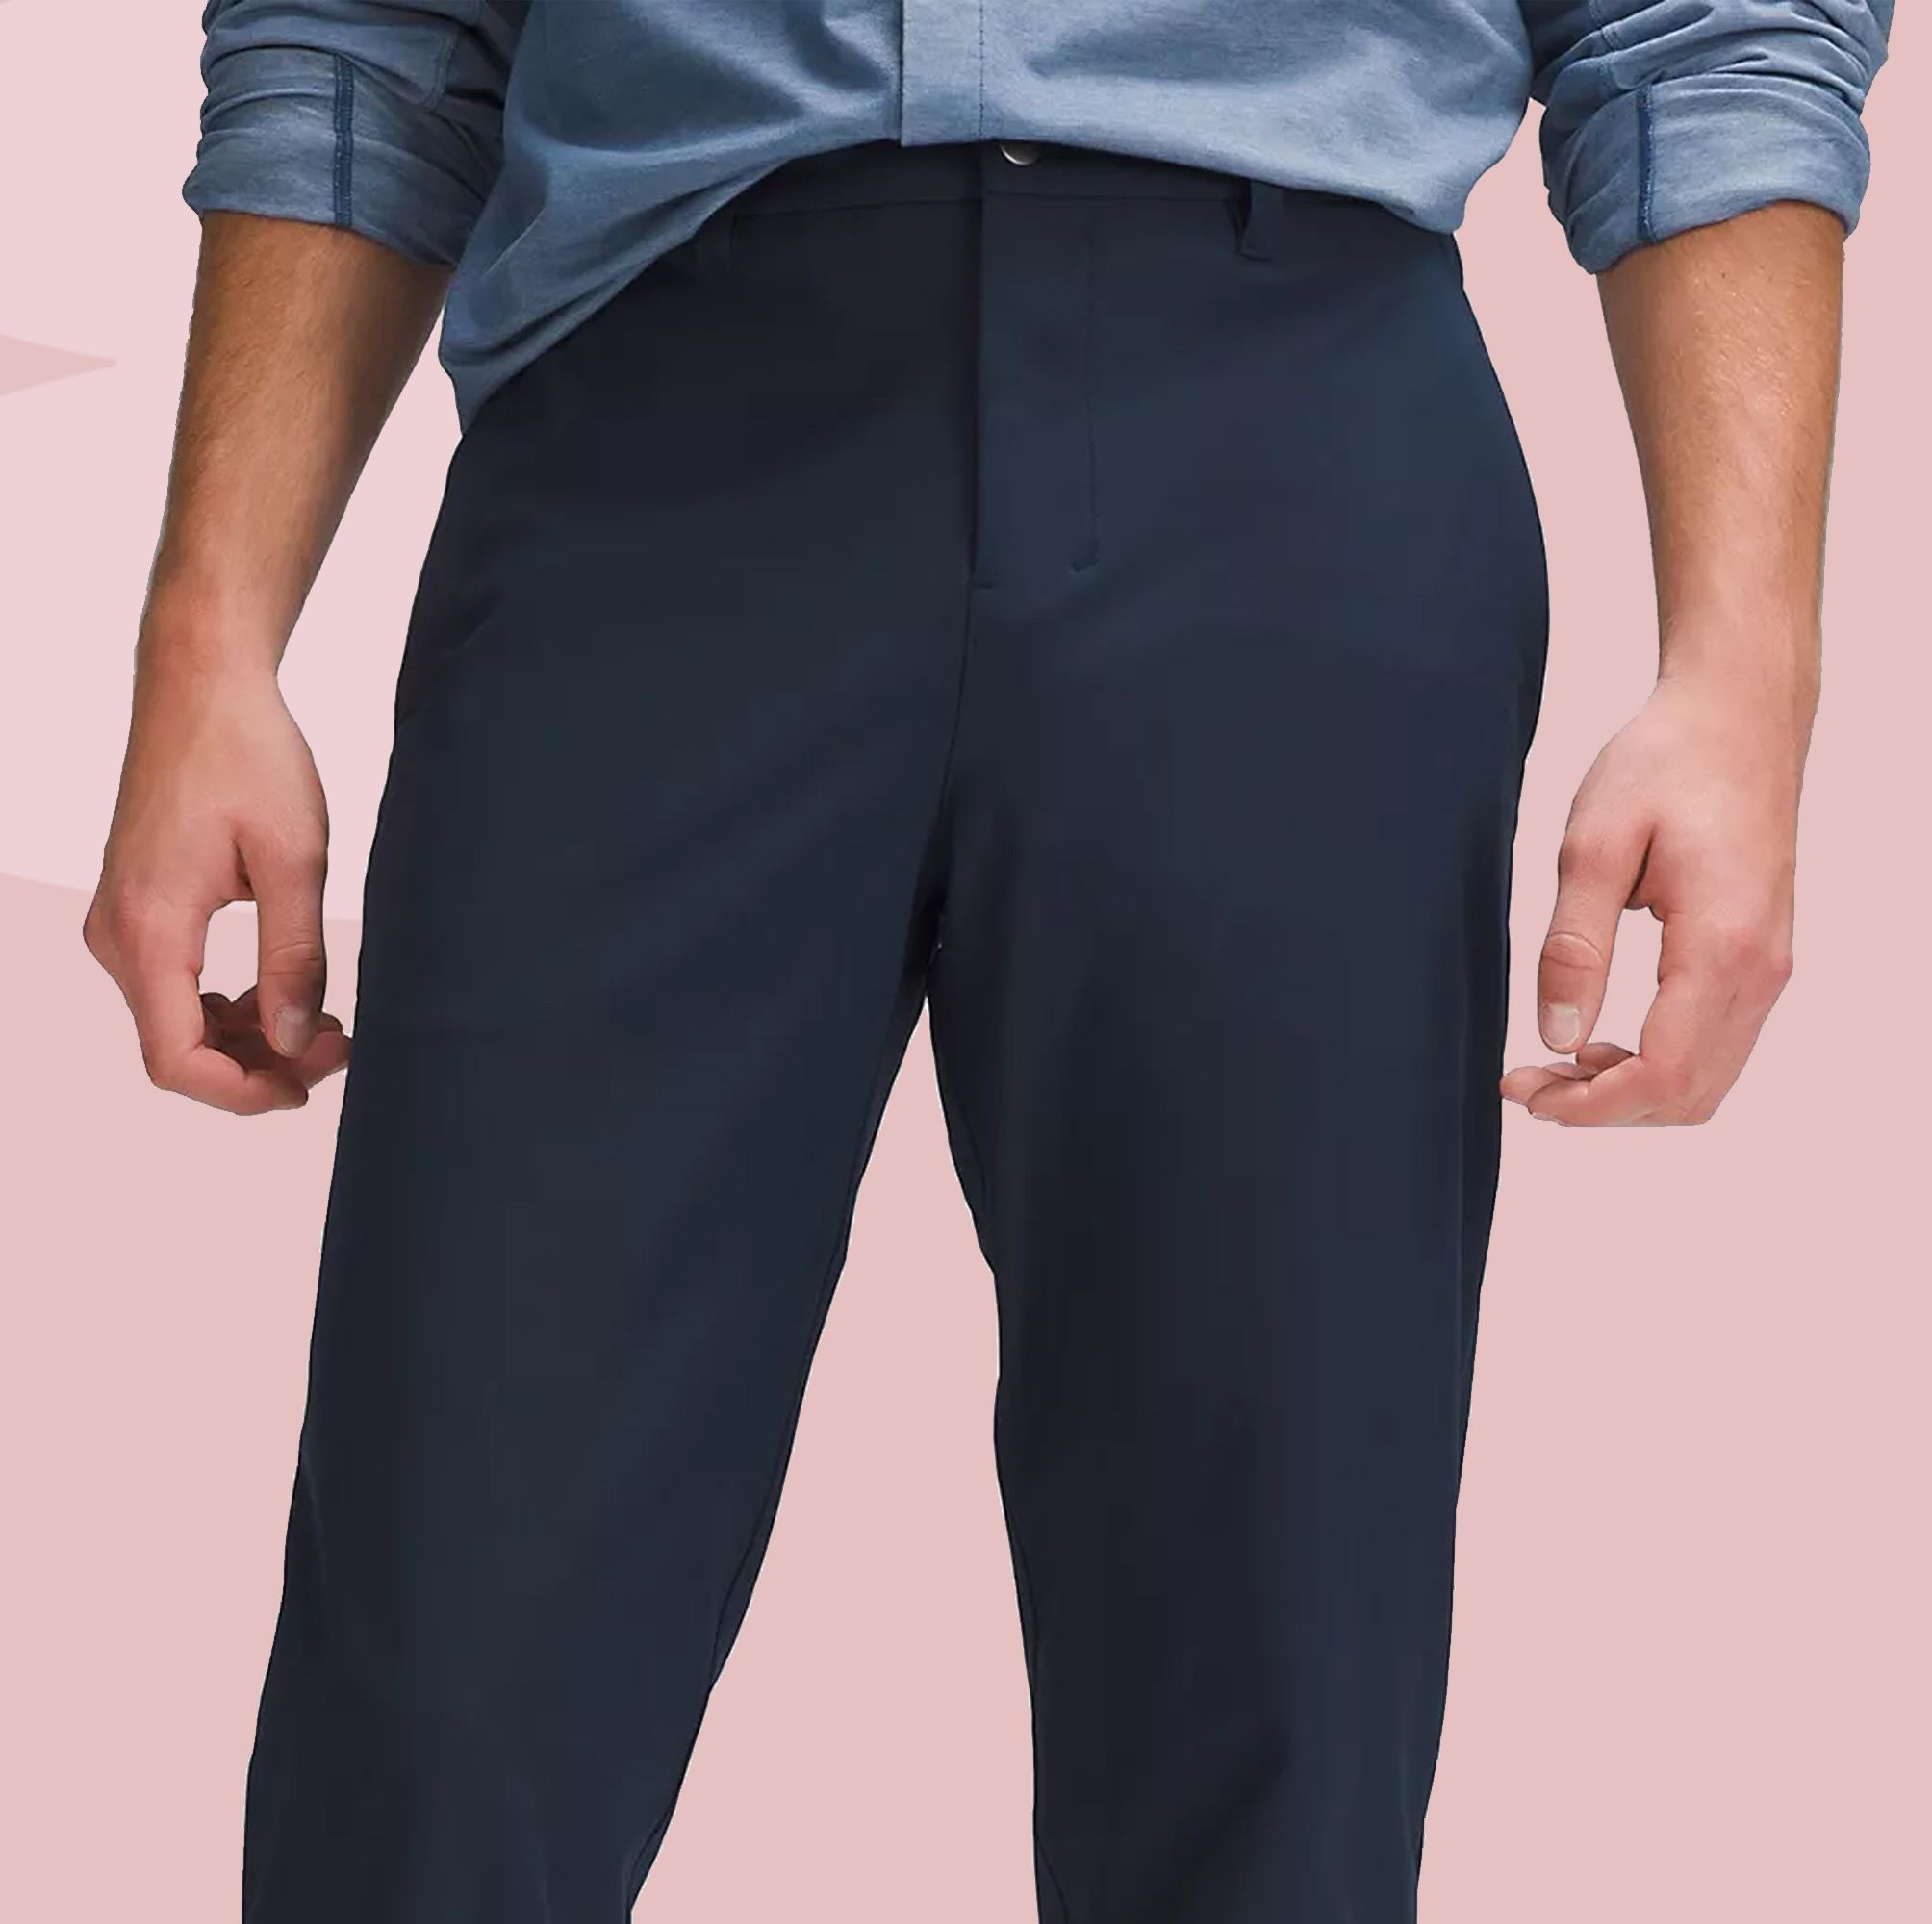 These Are The Best Pants to Wear to Work, No Matter The Season